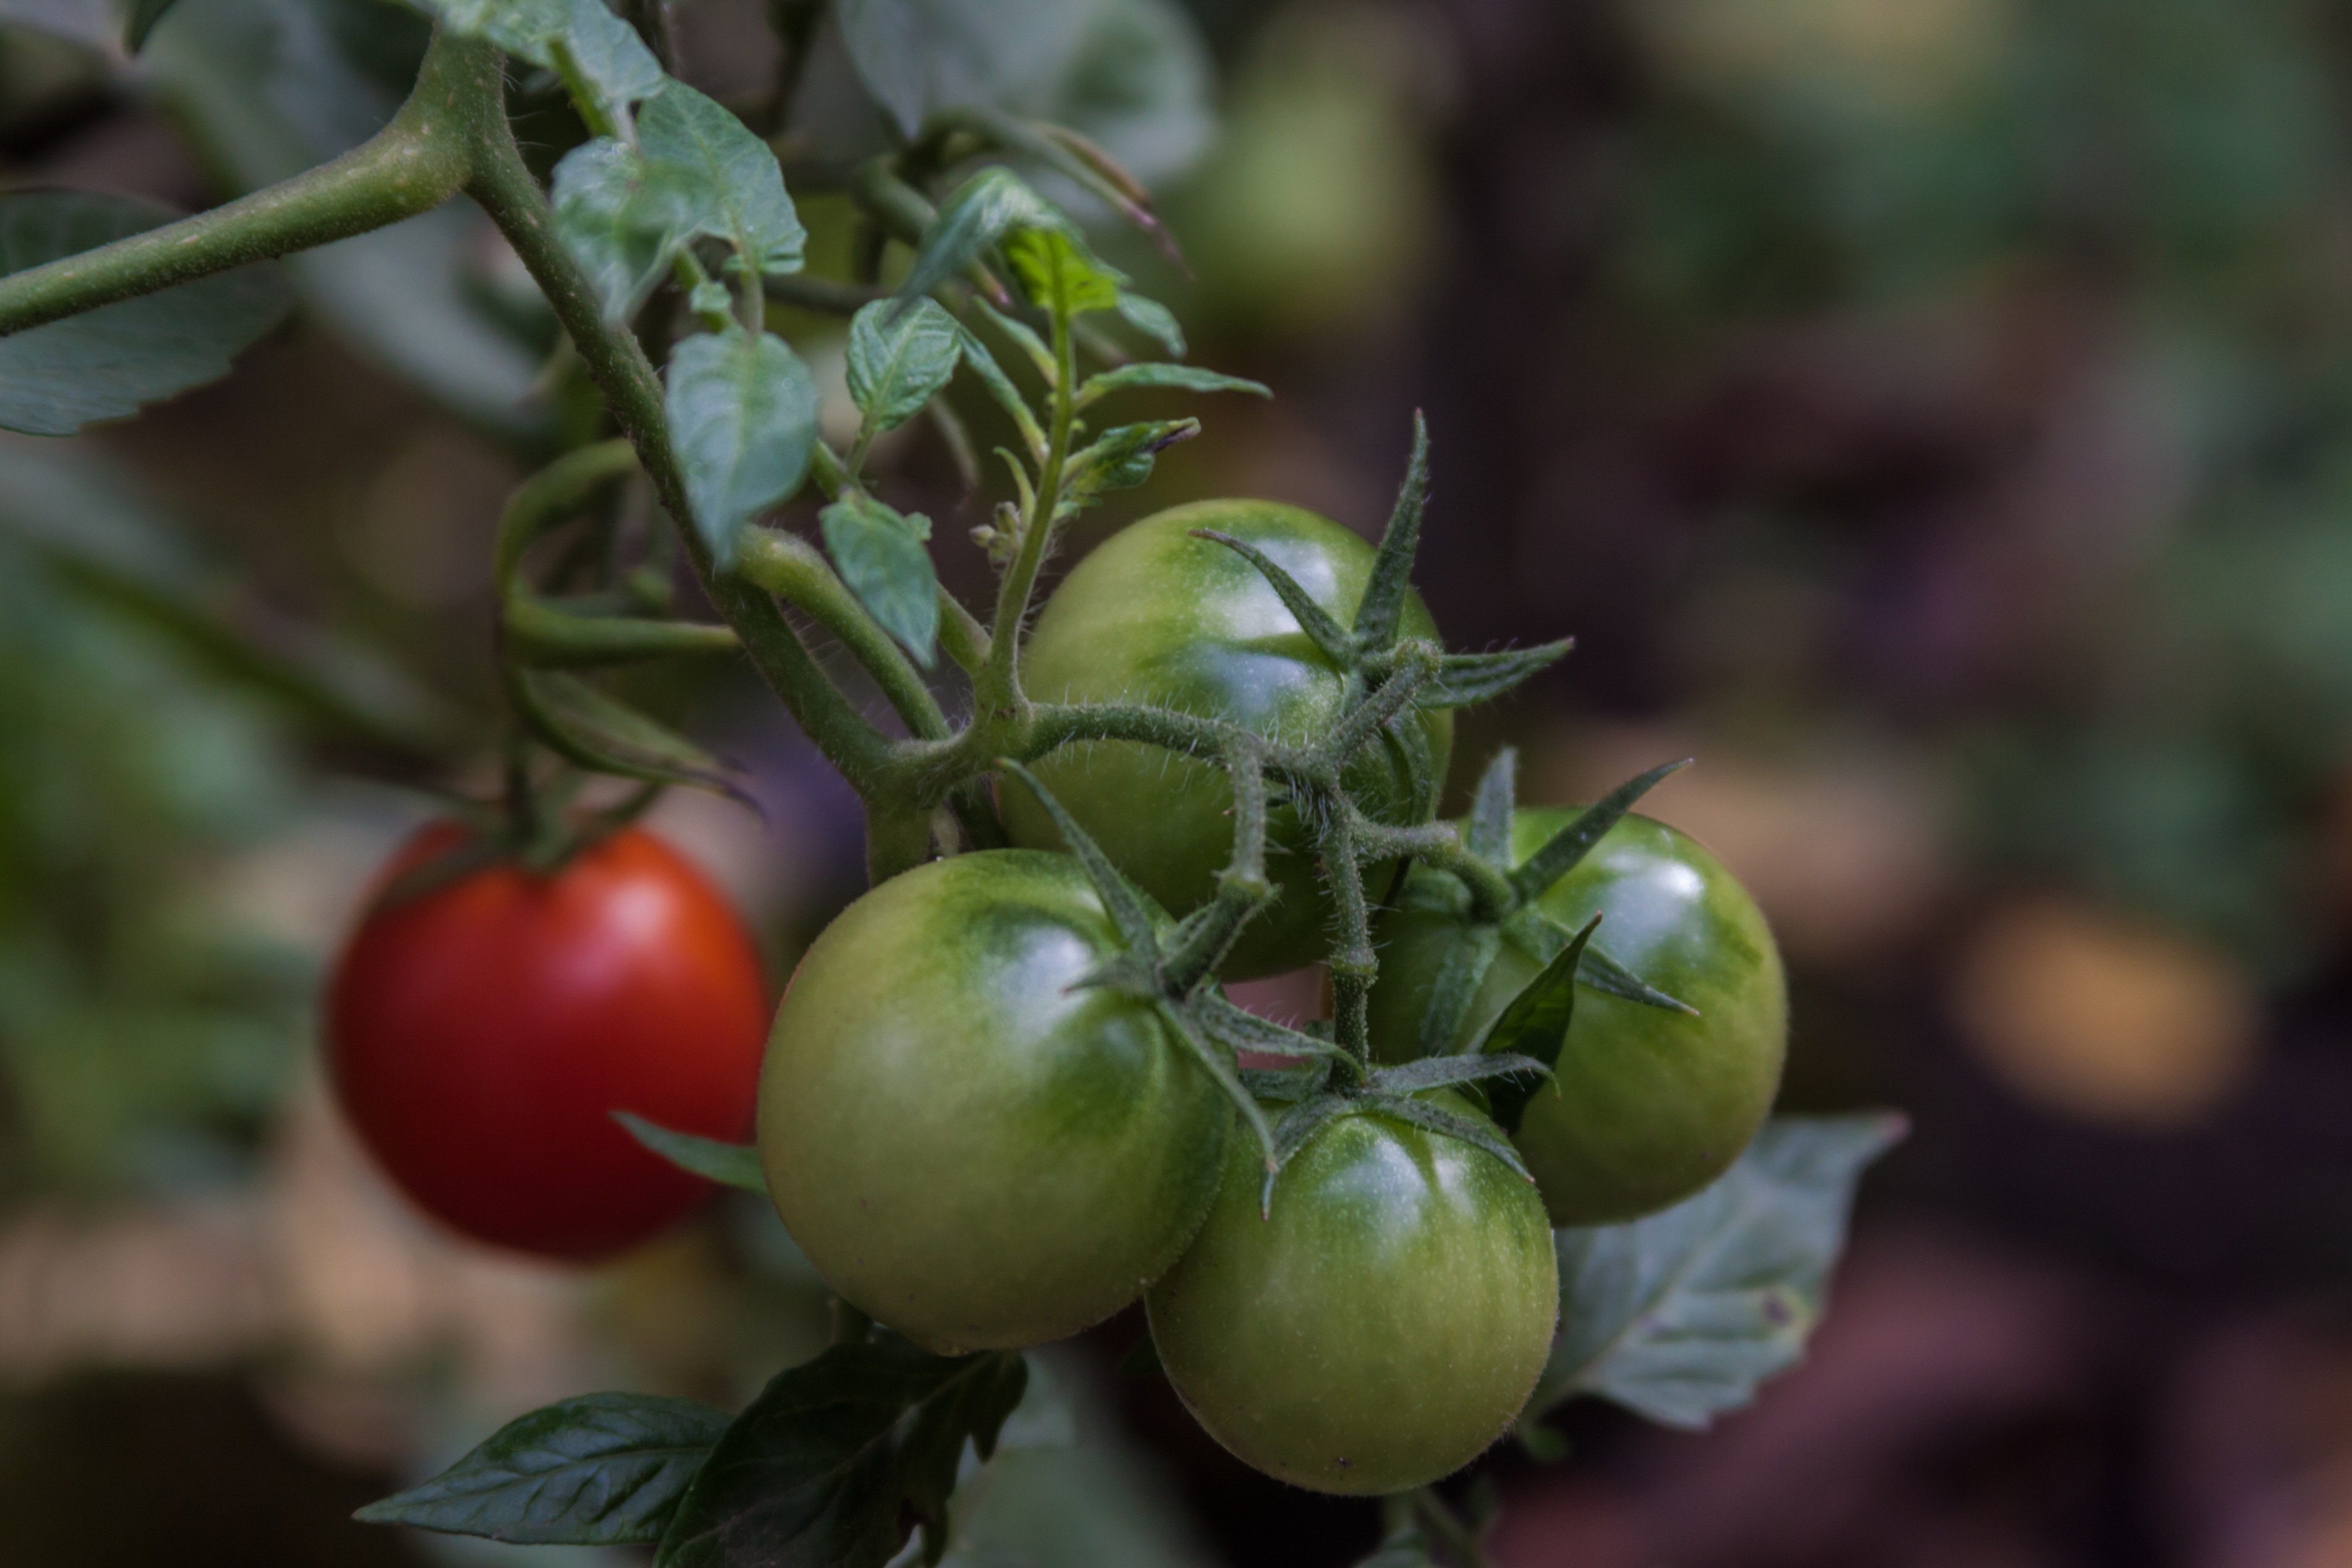 green and red tomatoes